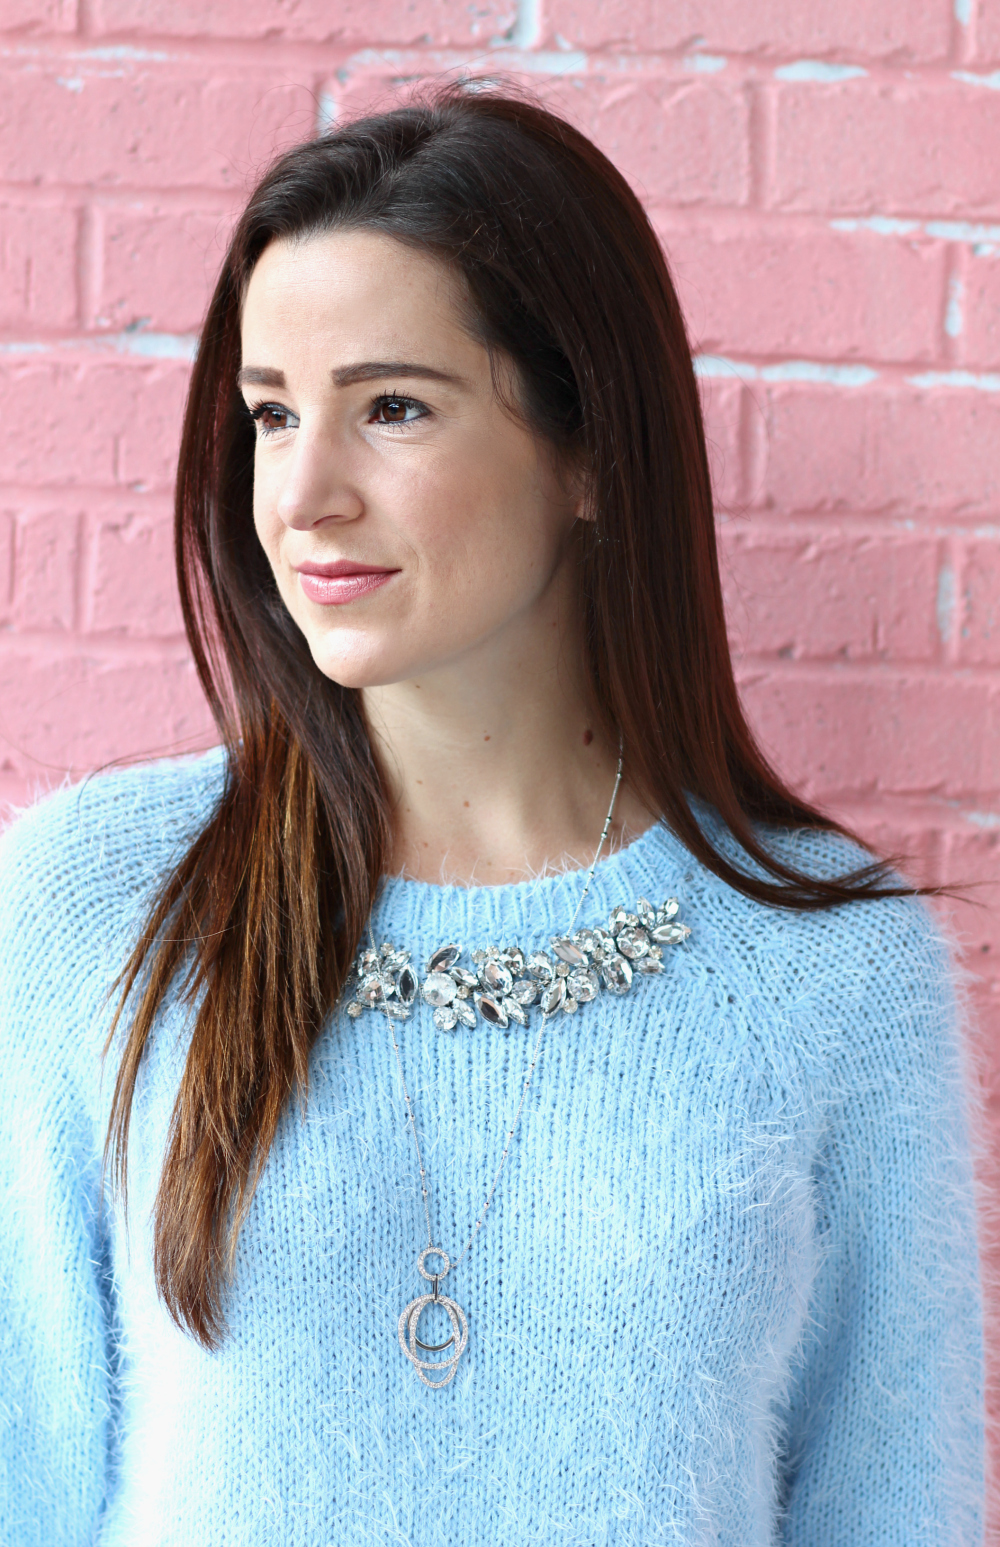 Periwinkle Sweater, Bejeweled Sweater, Baby Blue Sweater, PAIRIE Jewelry, Blue Jewelry, Jewelry Giveaway, Giveaway, Stephanie Ziajka, Diary of a Debutante